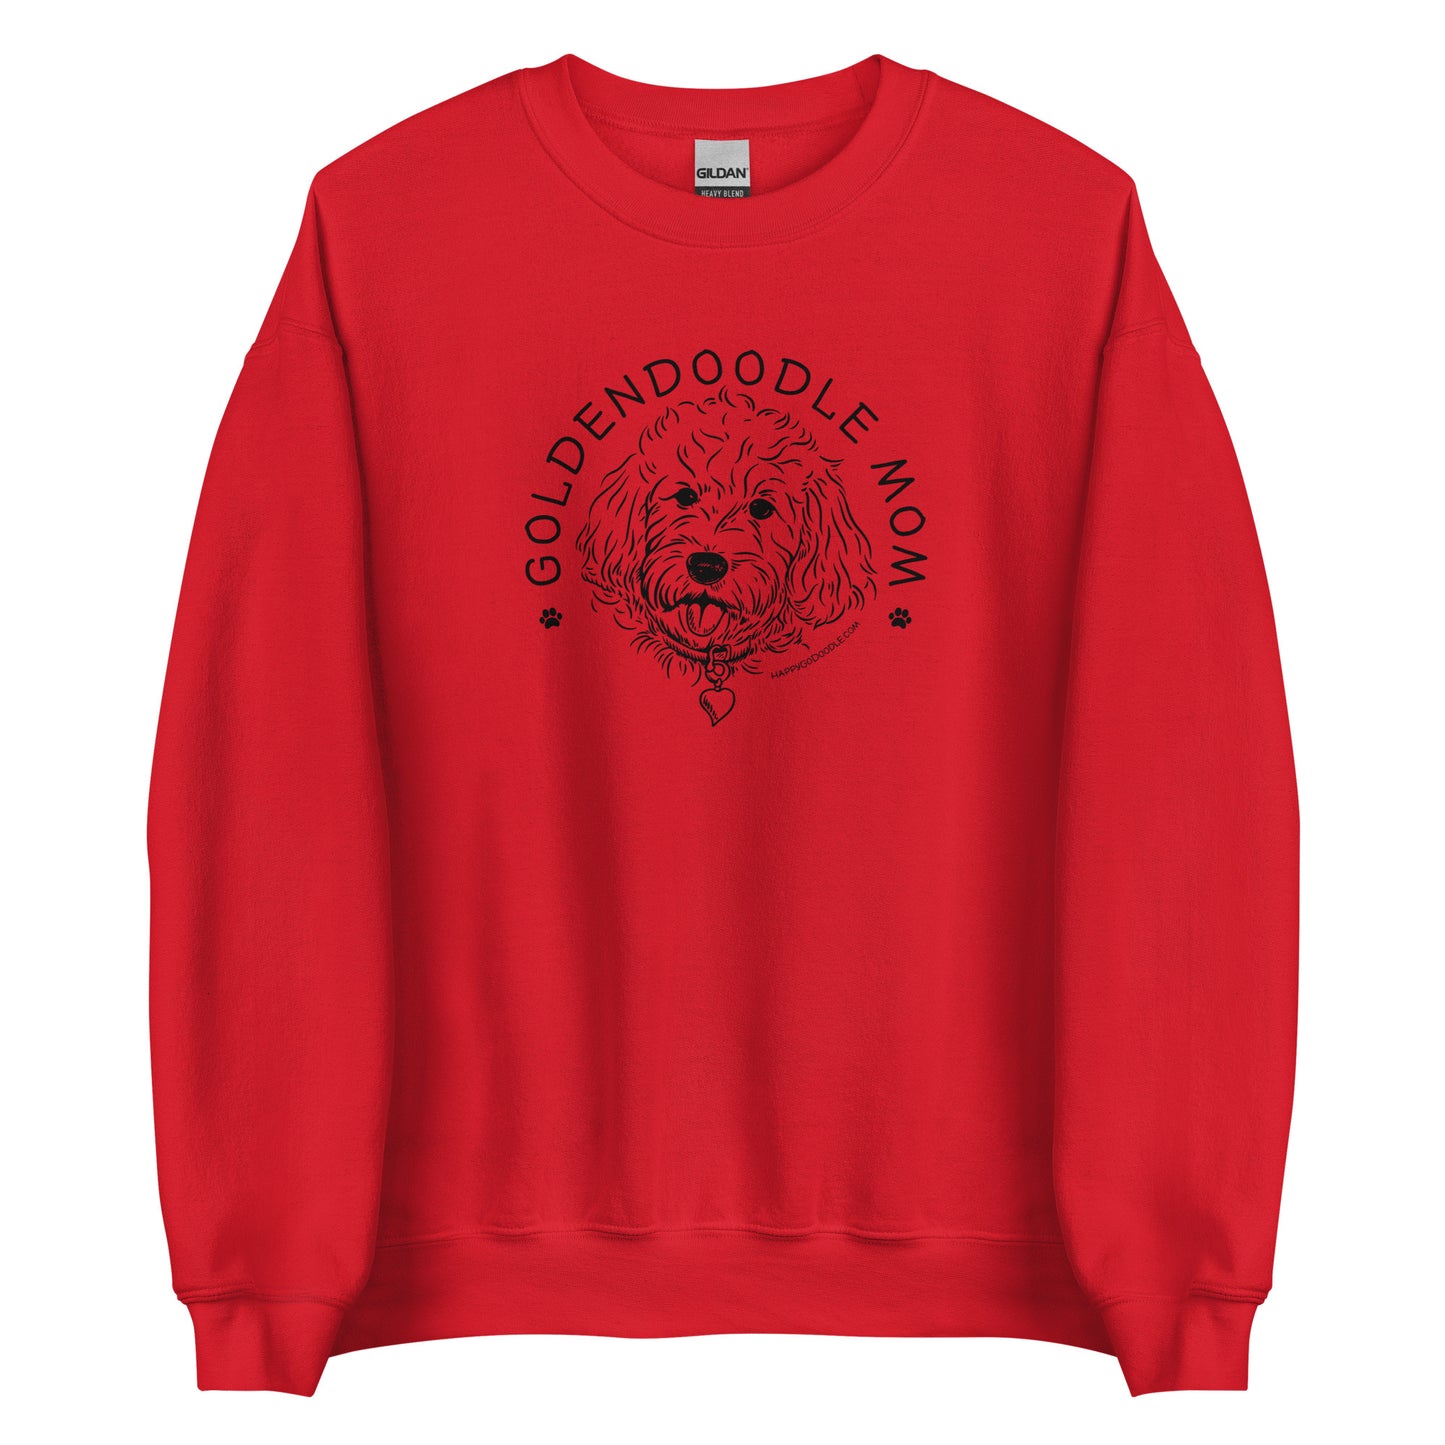 Goldendoodle crew neck sweatshirt with Goldendoodle face and words "Goldendoodle Mom" in red color